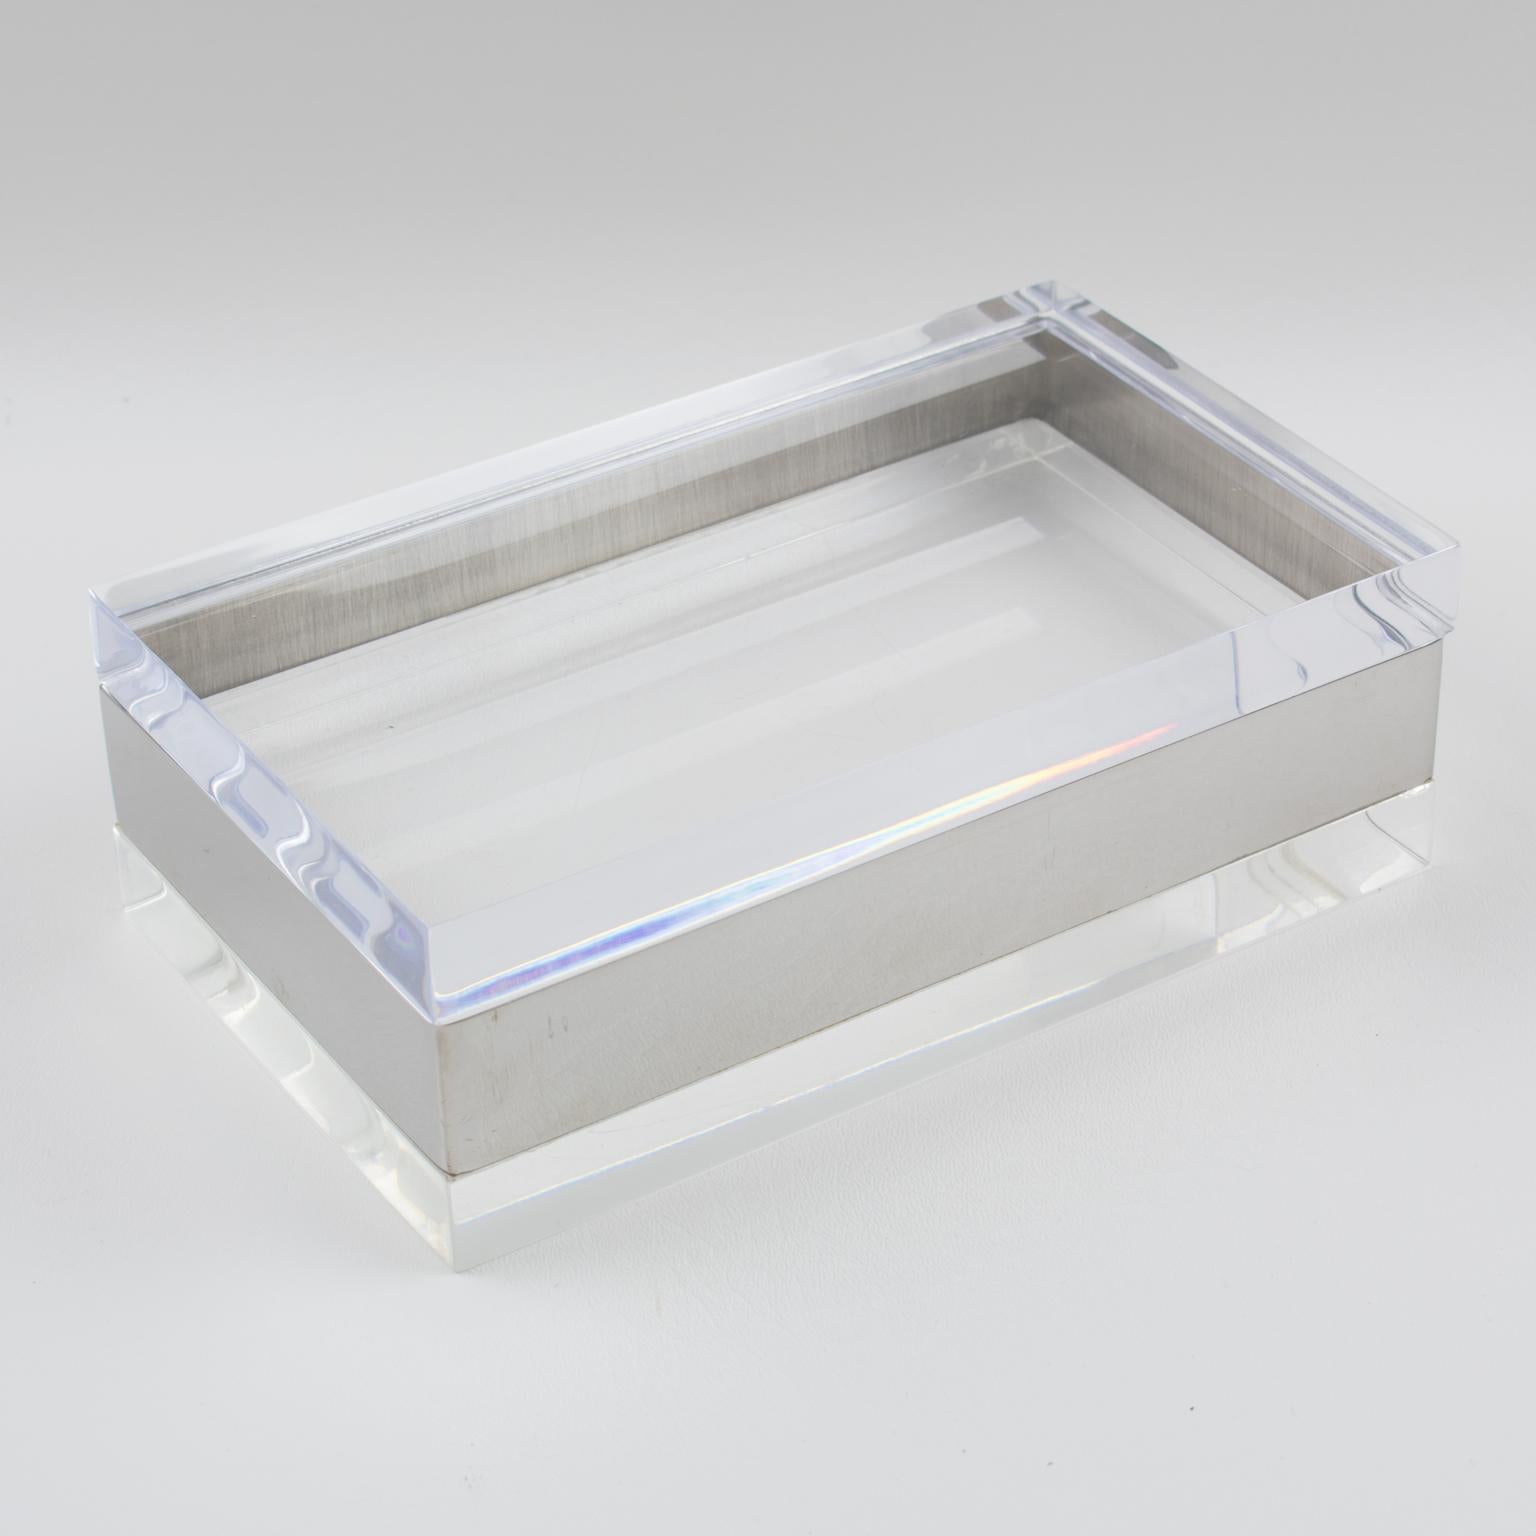 Elegant 1970s rectangular shaped decorative lidded box. Thick crystal clear Lucite or Plexiglass lid and base and chromed metal sides. Very interesting constructed design. No visible maker's mark.
Measurements: 8.07 in. wide (20.5 cm) x 4.94 in.